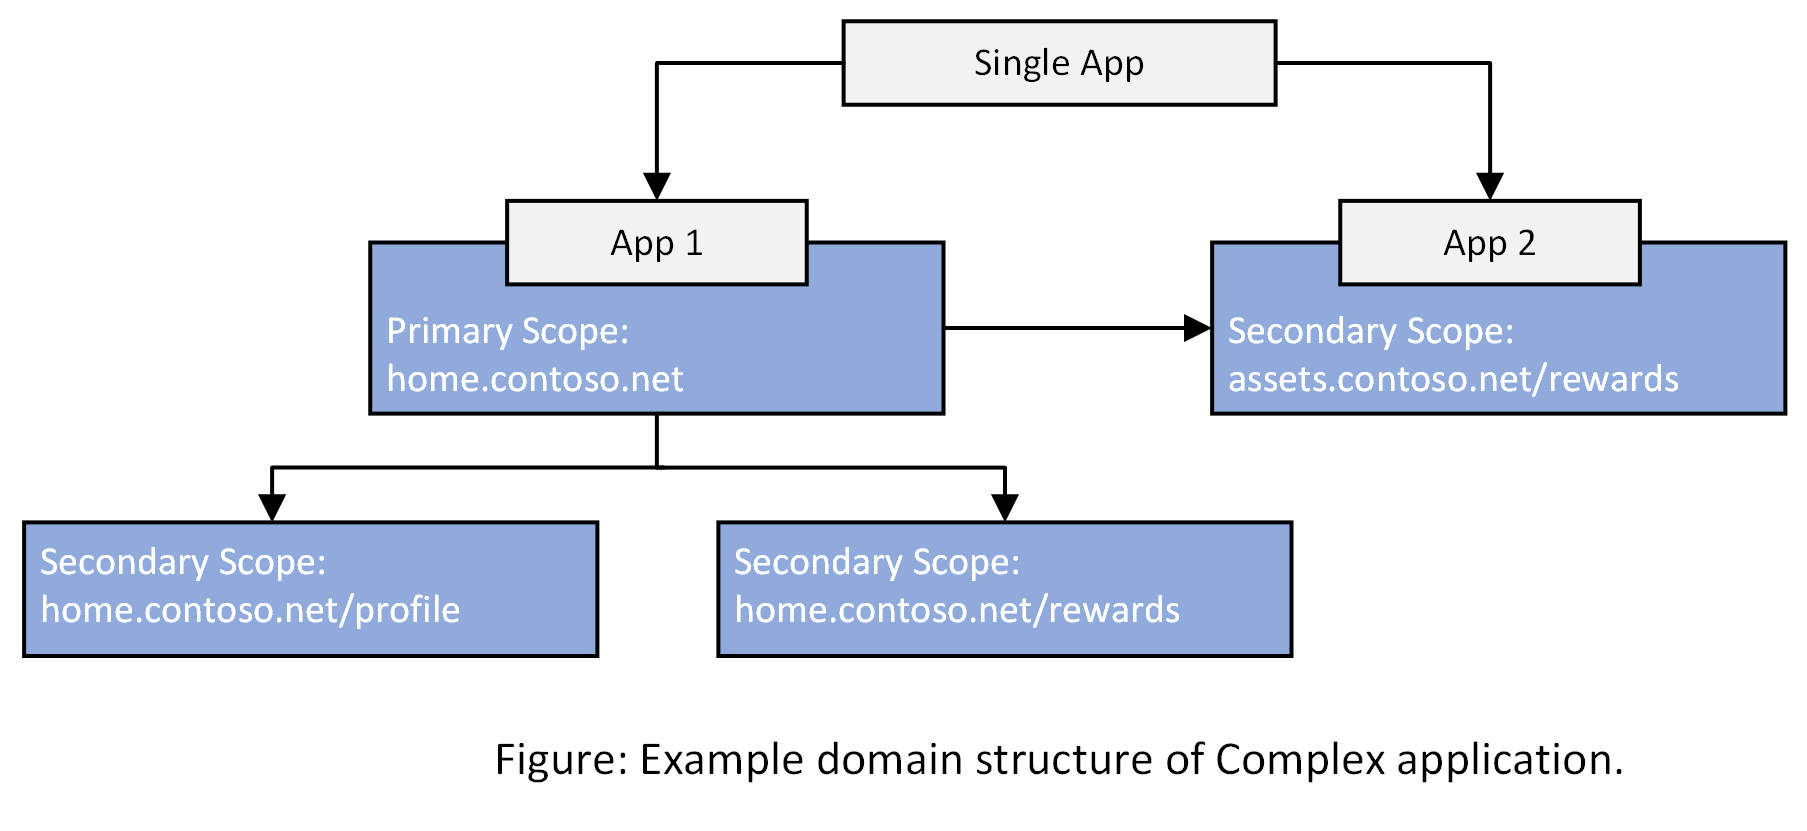 Diagram of domain structure for a complex application showing resource sharing between primary and secondary application.